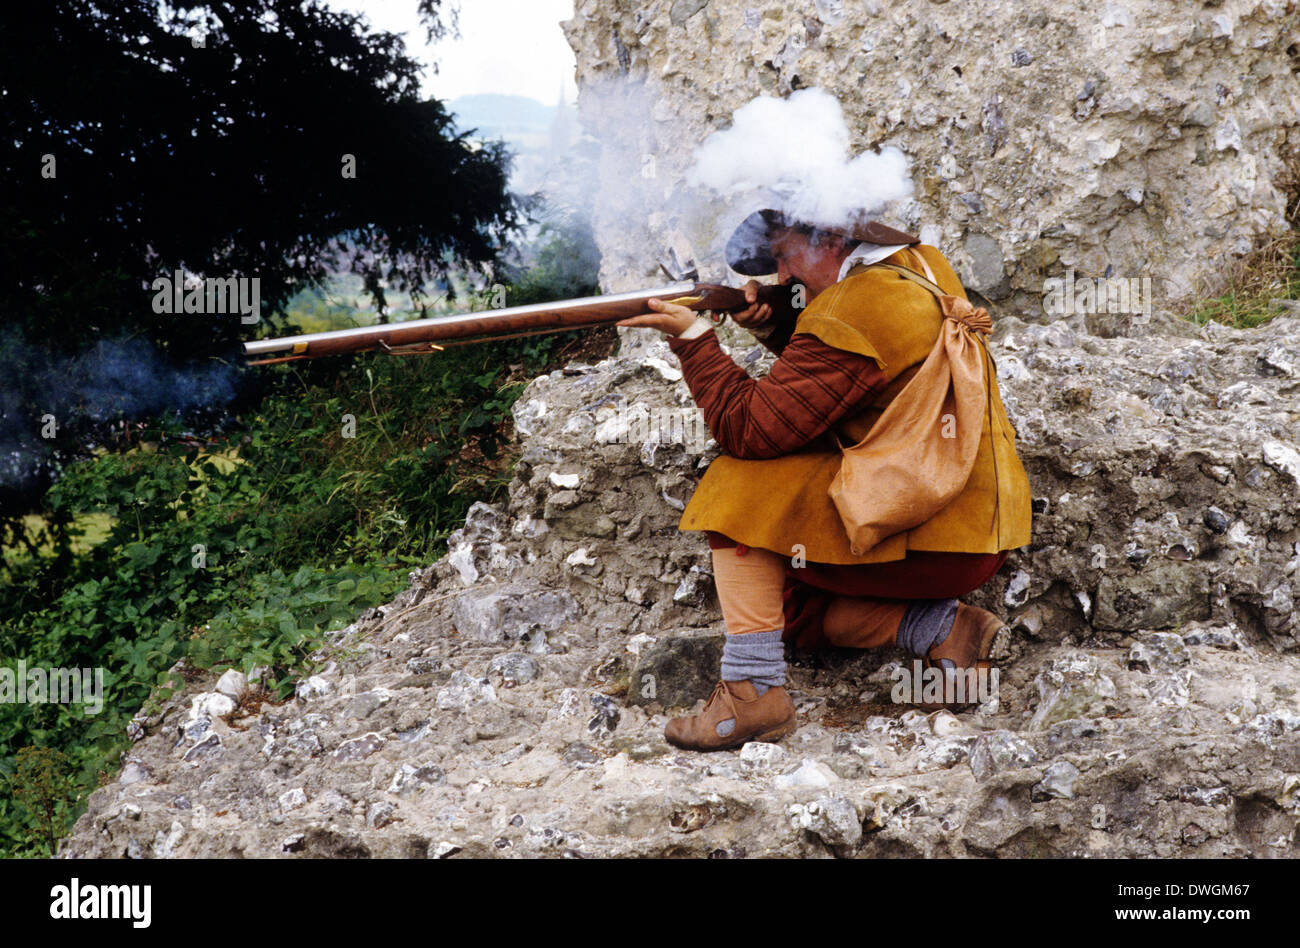 English Civil War musketeer, firing musket, smoke army soldier soldiers 17th century historical re-enactment England UK Stock Photo